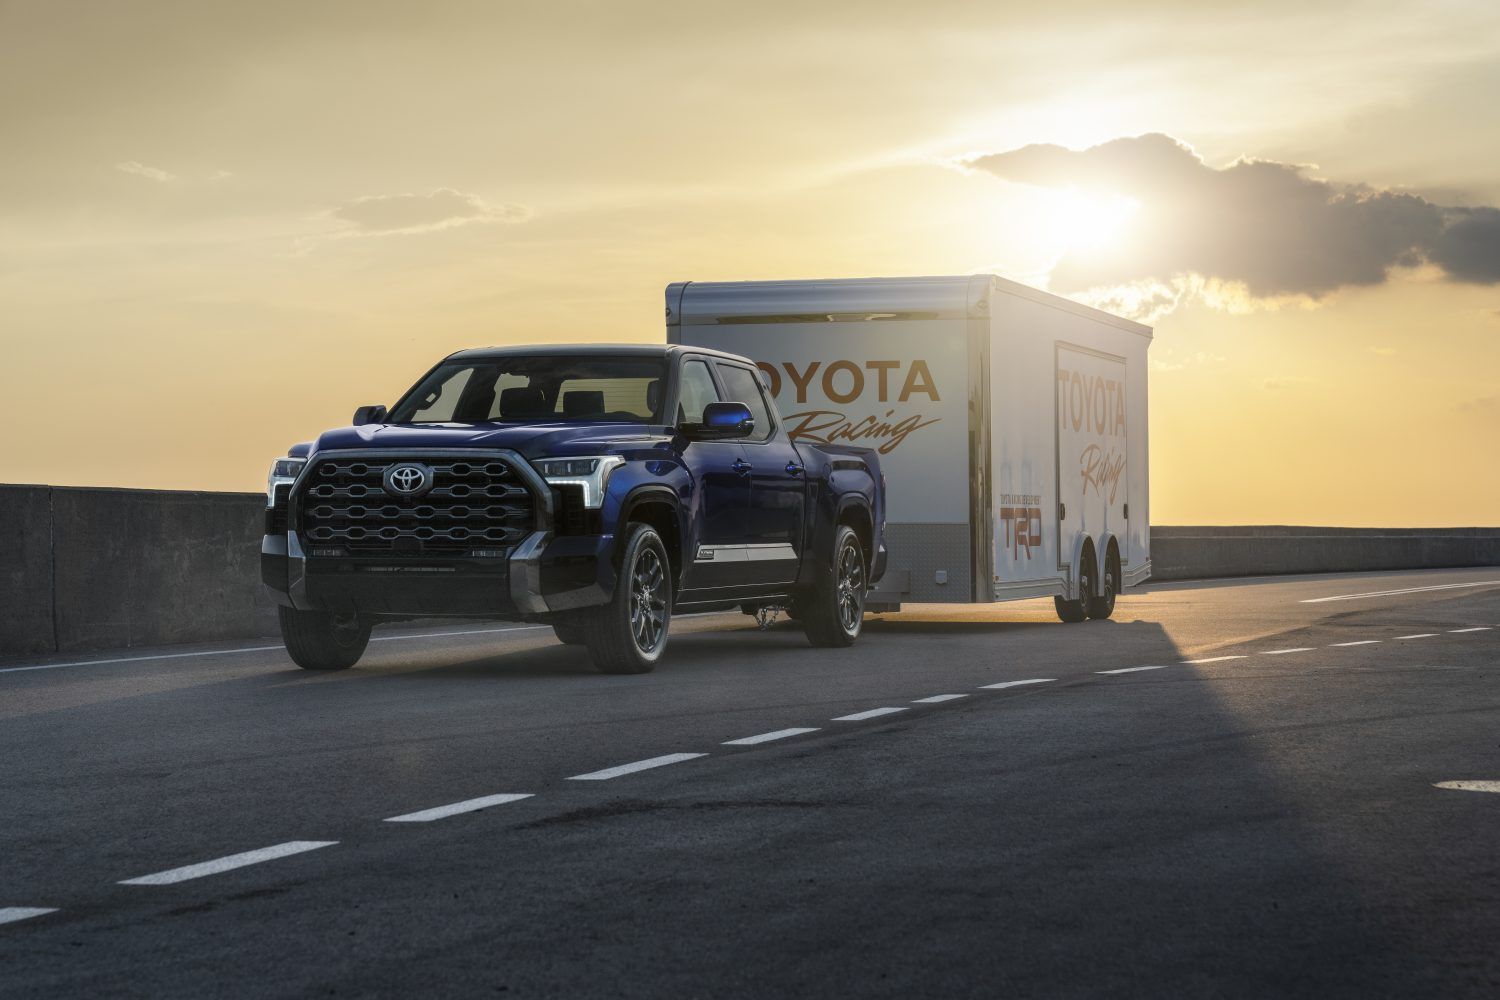 2022 Toyota tundra iforce max hybrid release new TRD Pro for sale best option towing trailer test max